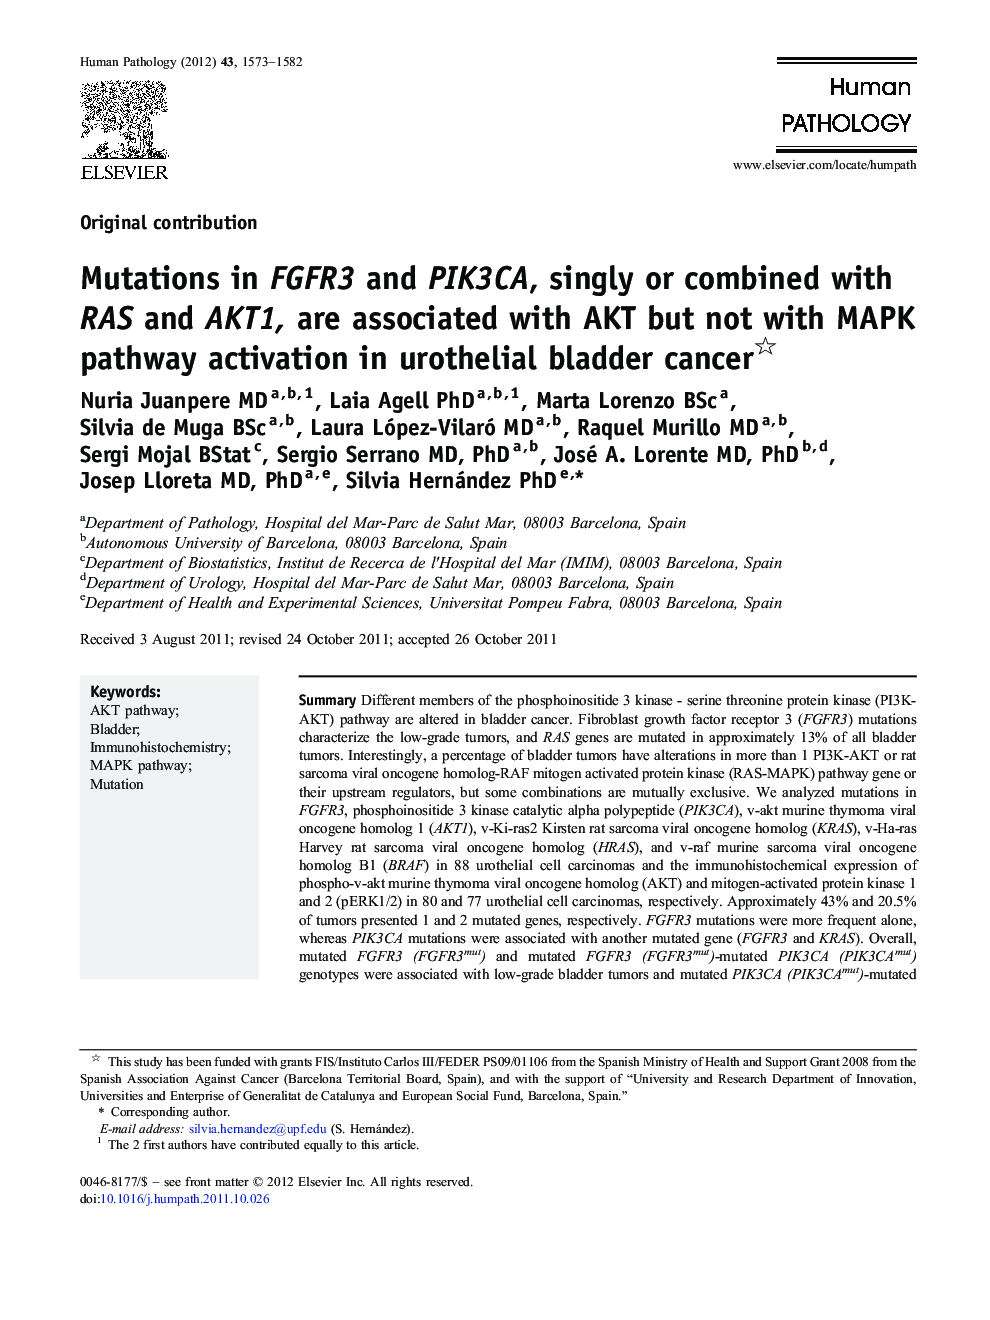 Mutations in FGFR3 and PIK3CA, singly or combined with RAS and AKT1, are associated with AKT but not with MAPK pathway activation in urothelial bladder cancer 